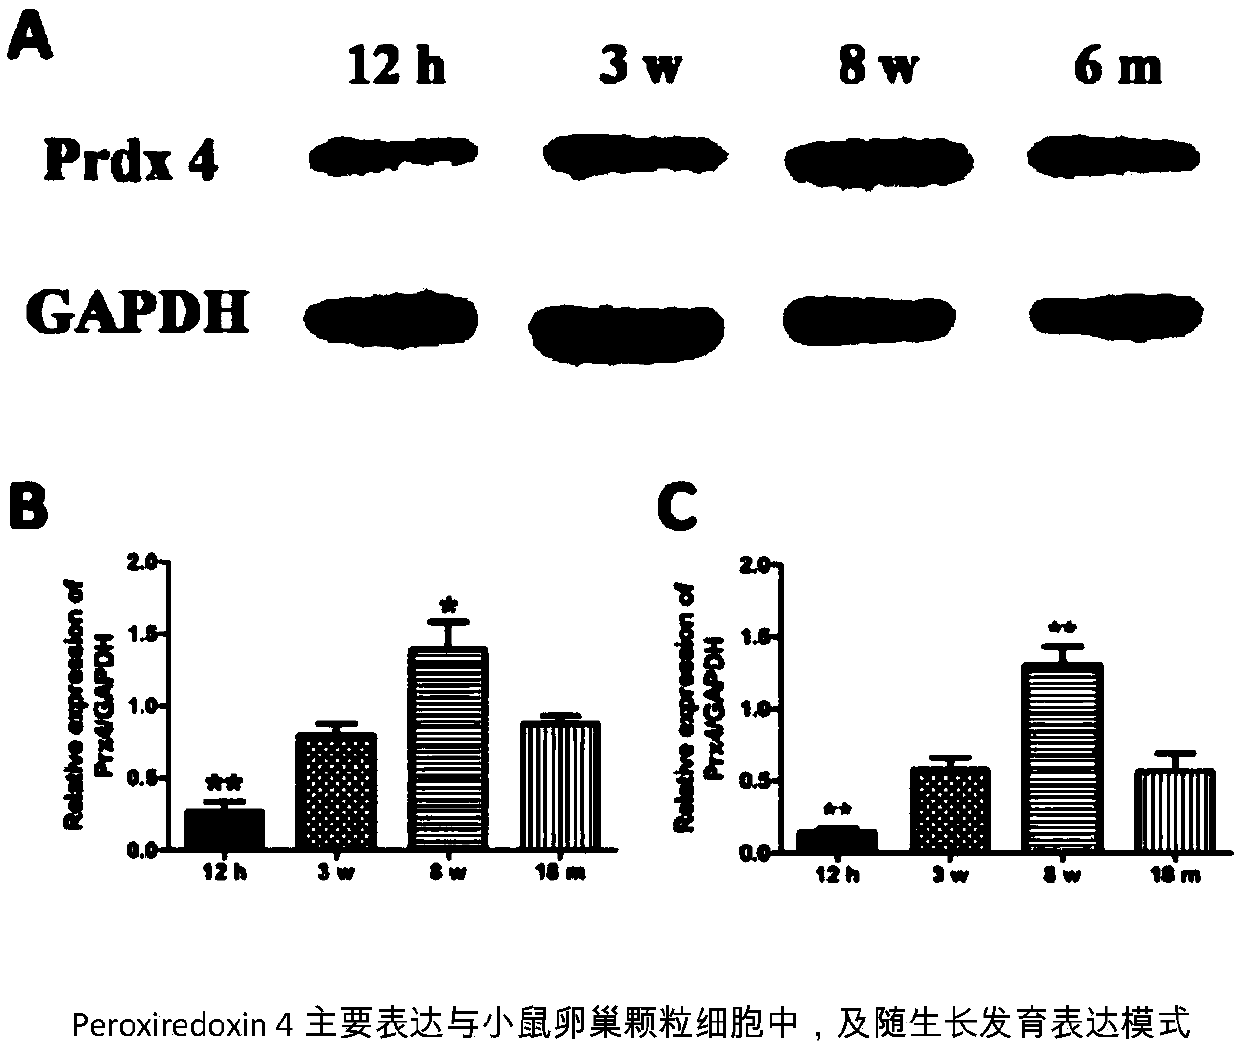 Application of enhancing antioxidation of oocyte cultured in vitro by Peroxiredoxin 4 protein